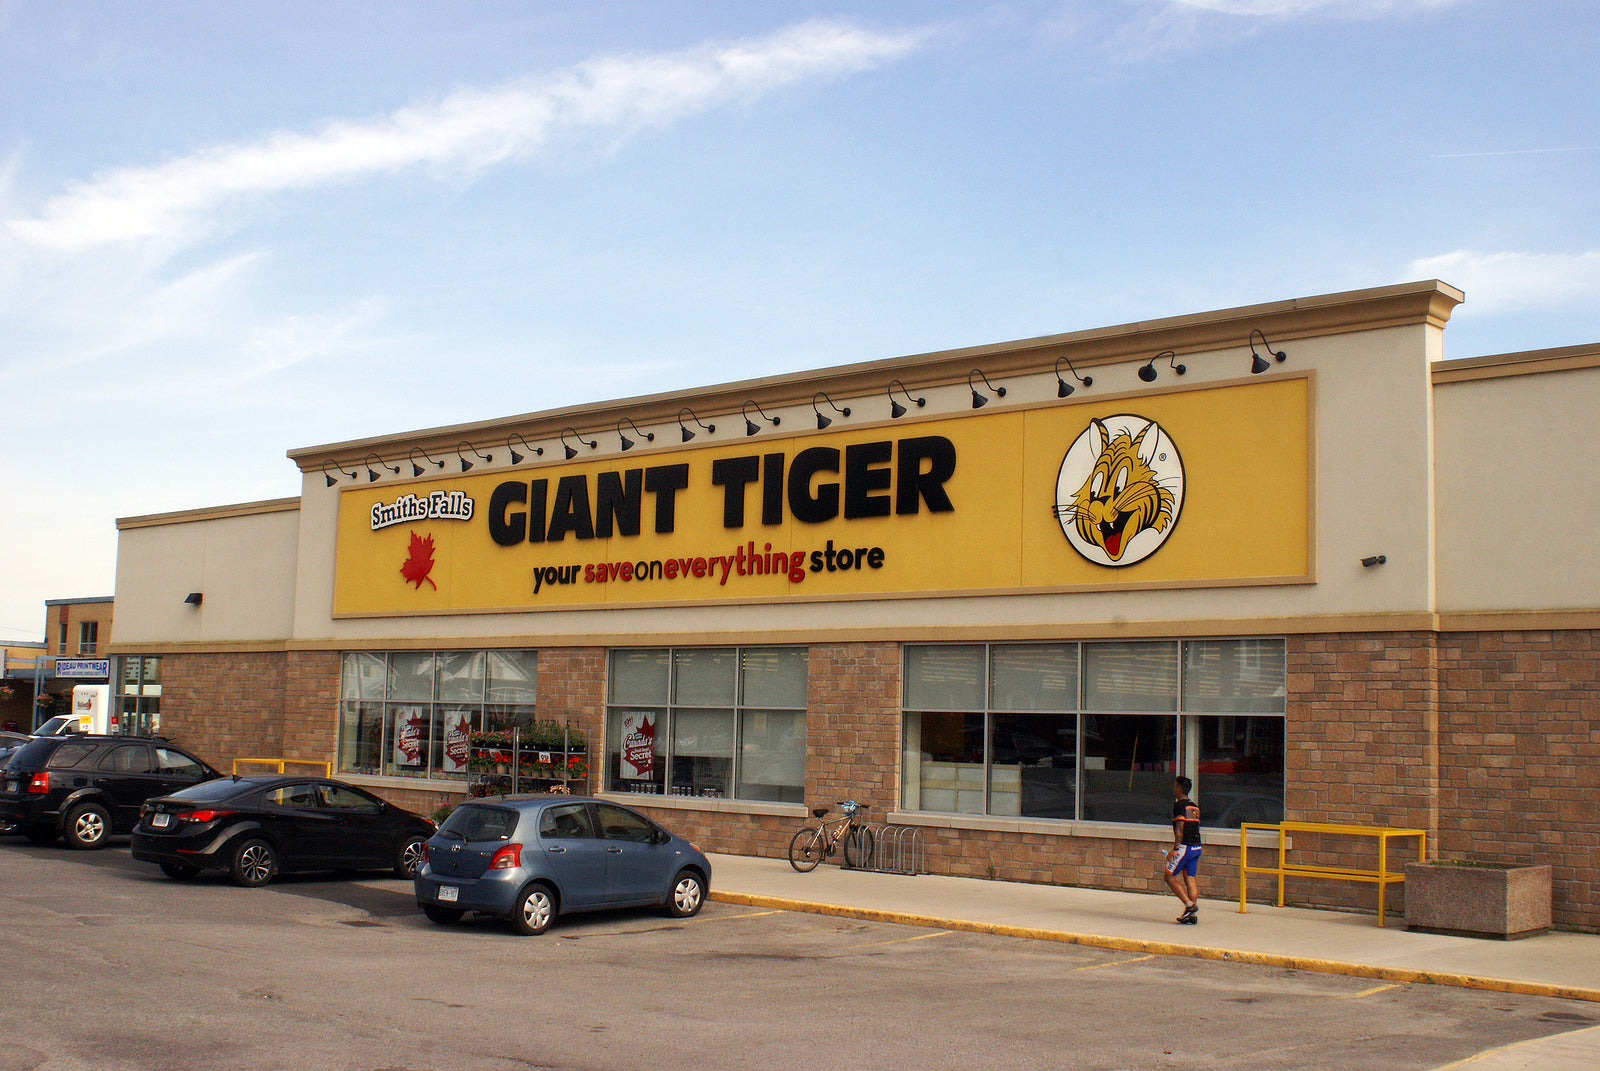 [Canada] Hacker takes responsibility for Giant Tiger data breach and release